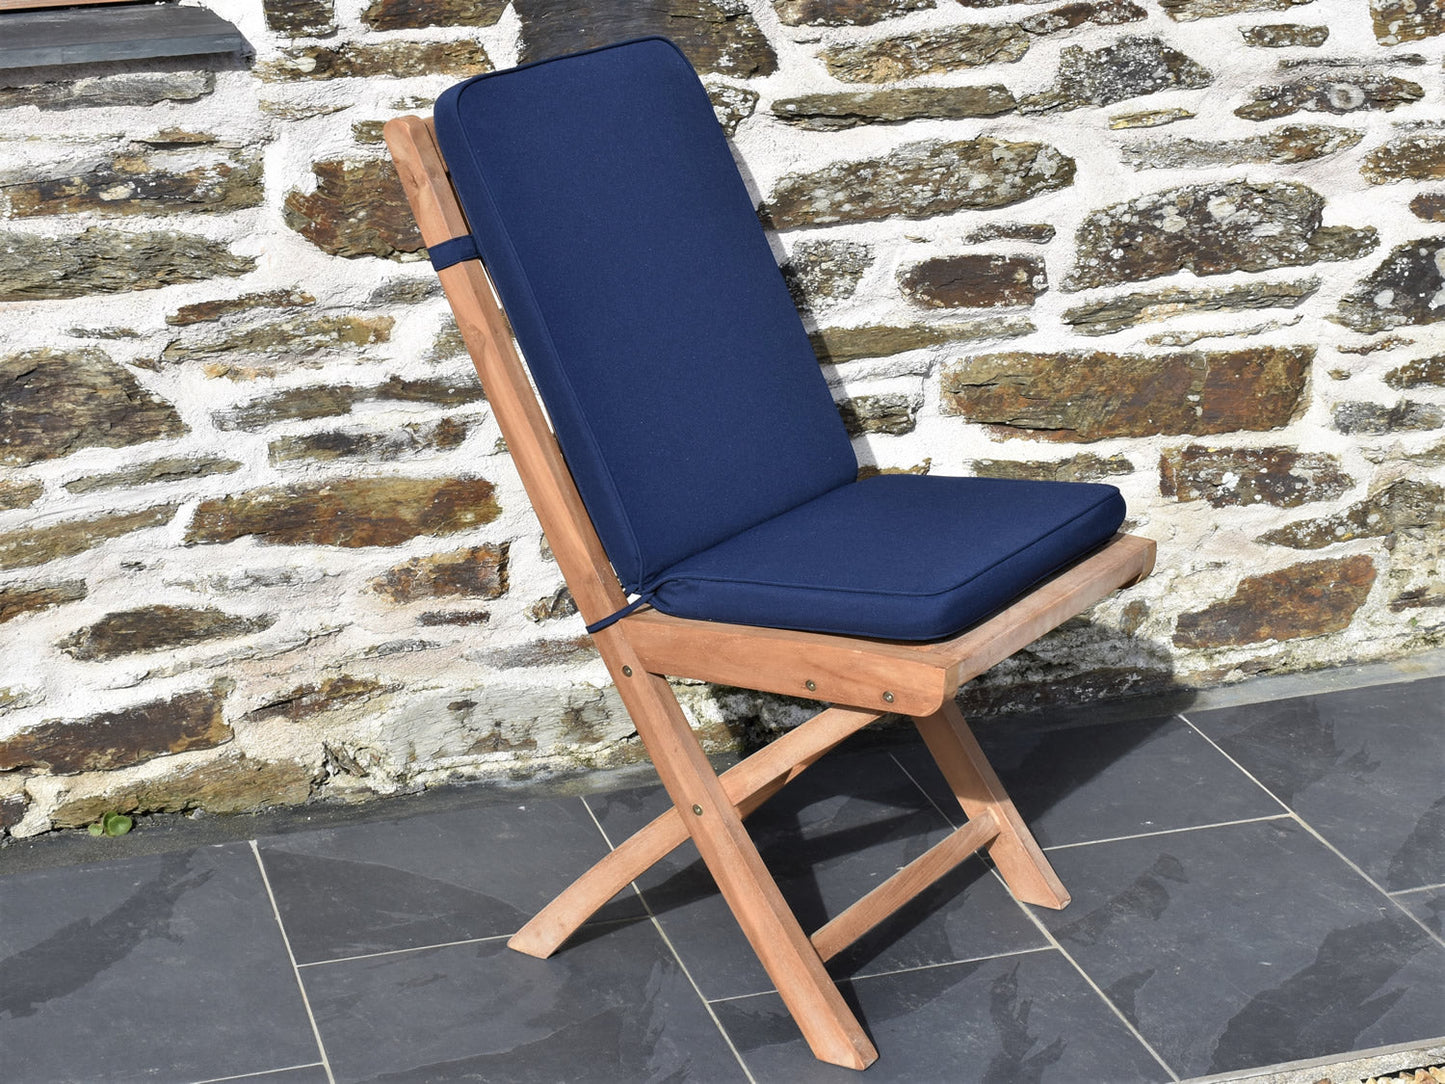 Classic dark blue folding garden seat pad and back cushion, perfect for teak folding garden chairs